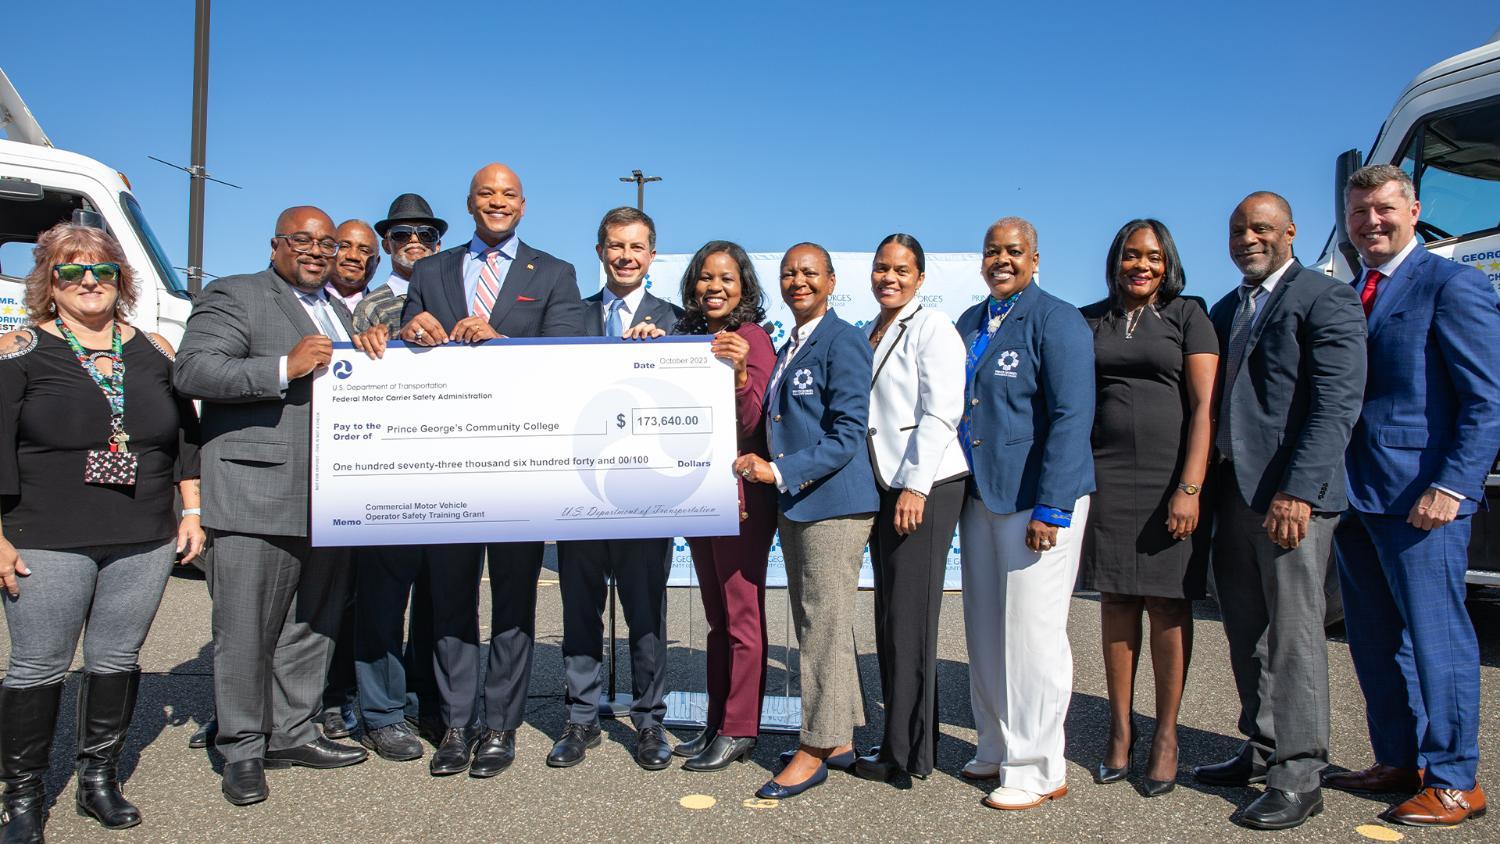 U.S. DOT Secretary Pete Buttigieg and Governor Wes Moore stand with Dr. Sherrie Johnson, Barbara McCreary, James Brackin, Dena Wilson, Chanelle Whittaker, former Representative Patrick Murphy, and others while presenting a grant funding award to PGCC.